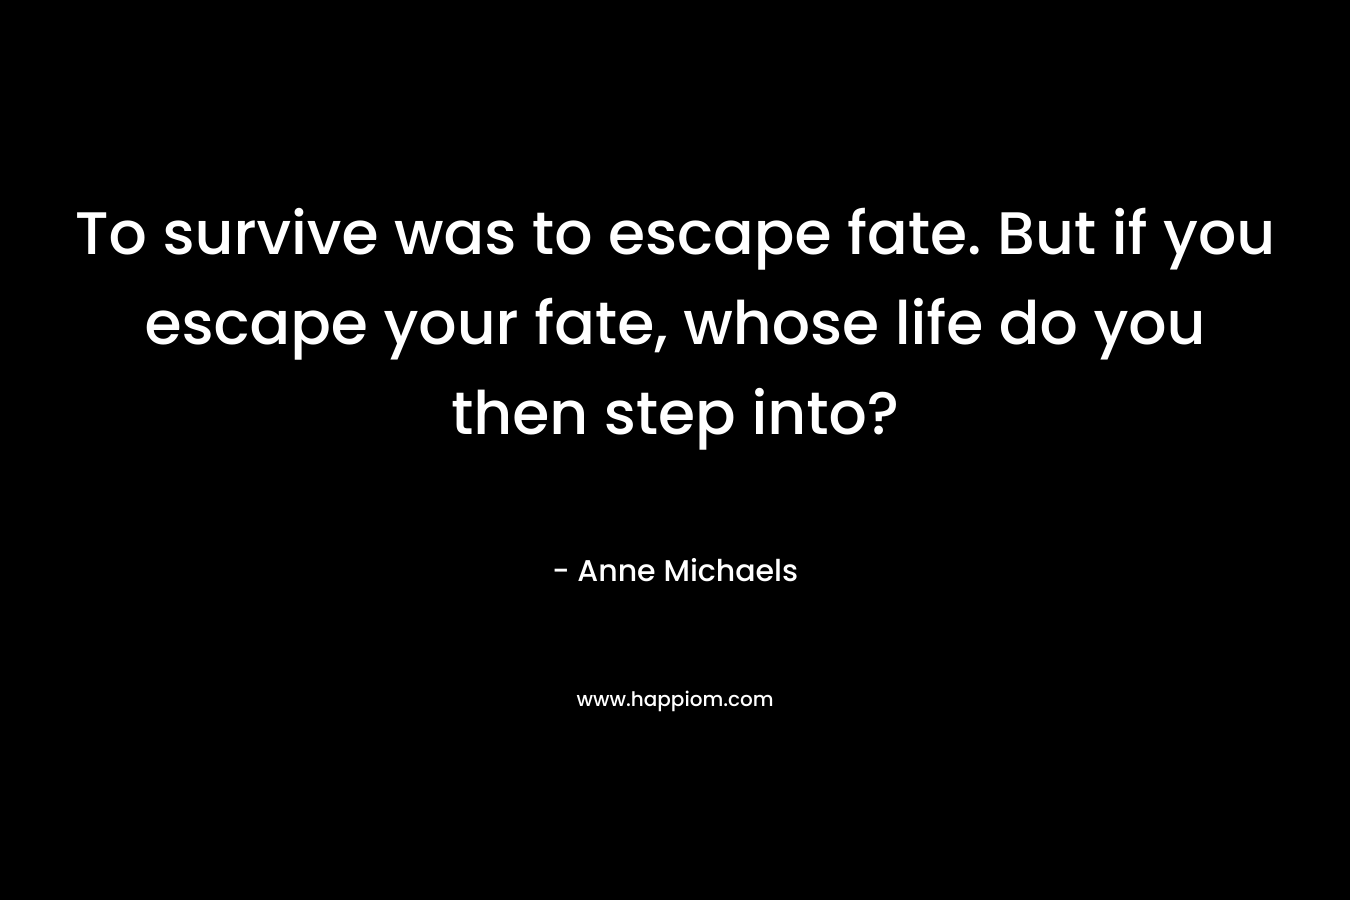 To survive was to escape fate. But if you escape your fate, whose life do you then step into? – Anne Michaels